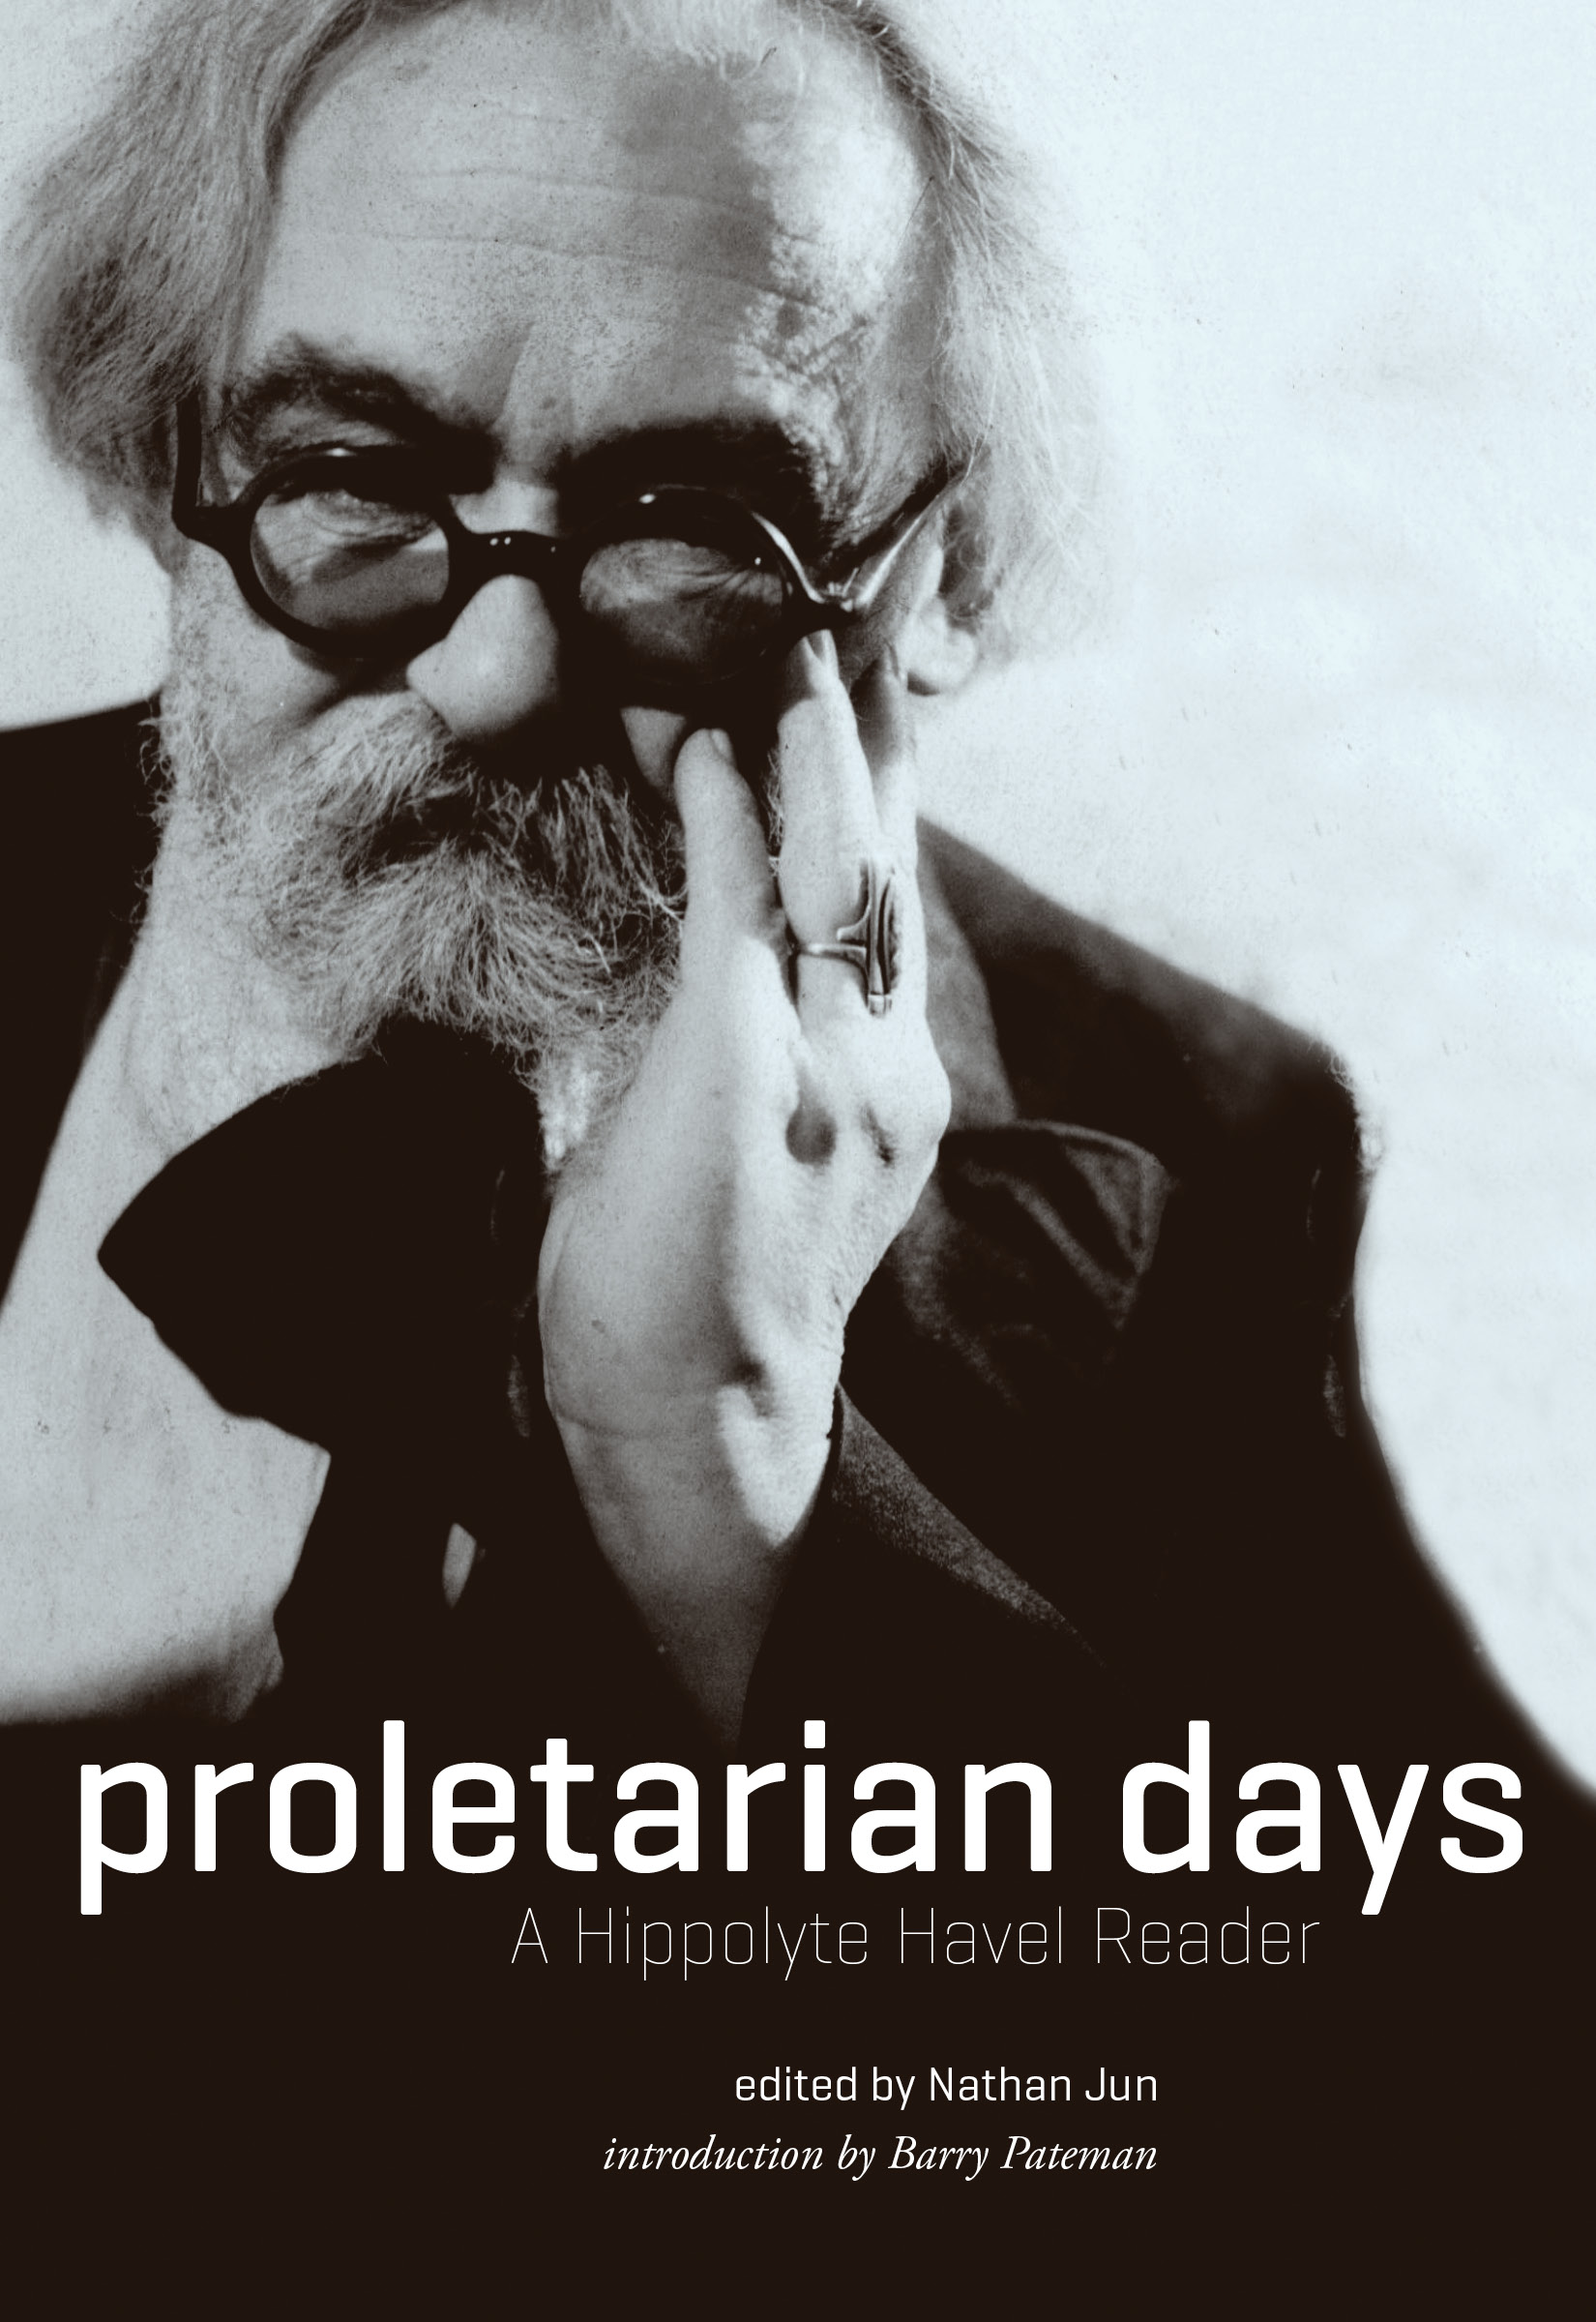 prolet arian days A Hippolyte Ha vel Reader edited by Nathan Jun - photo 1